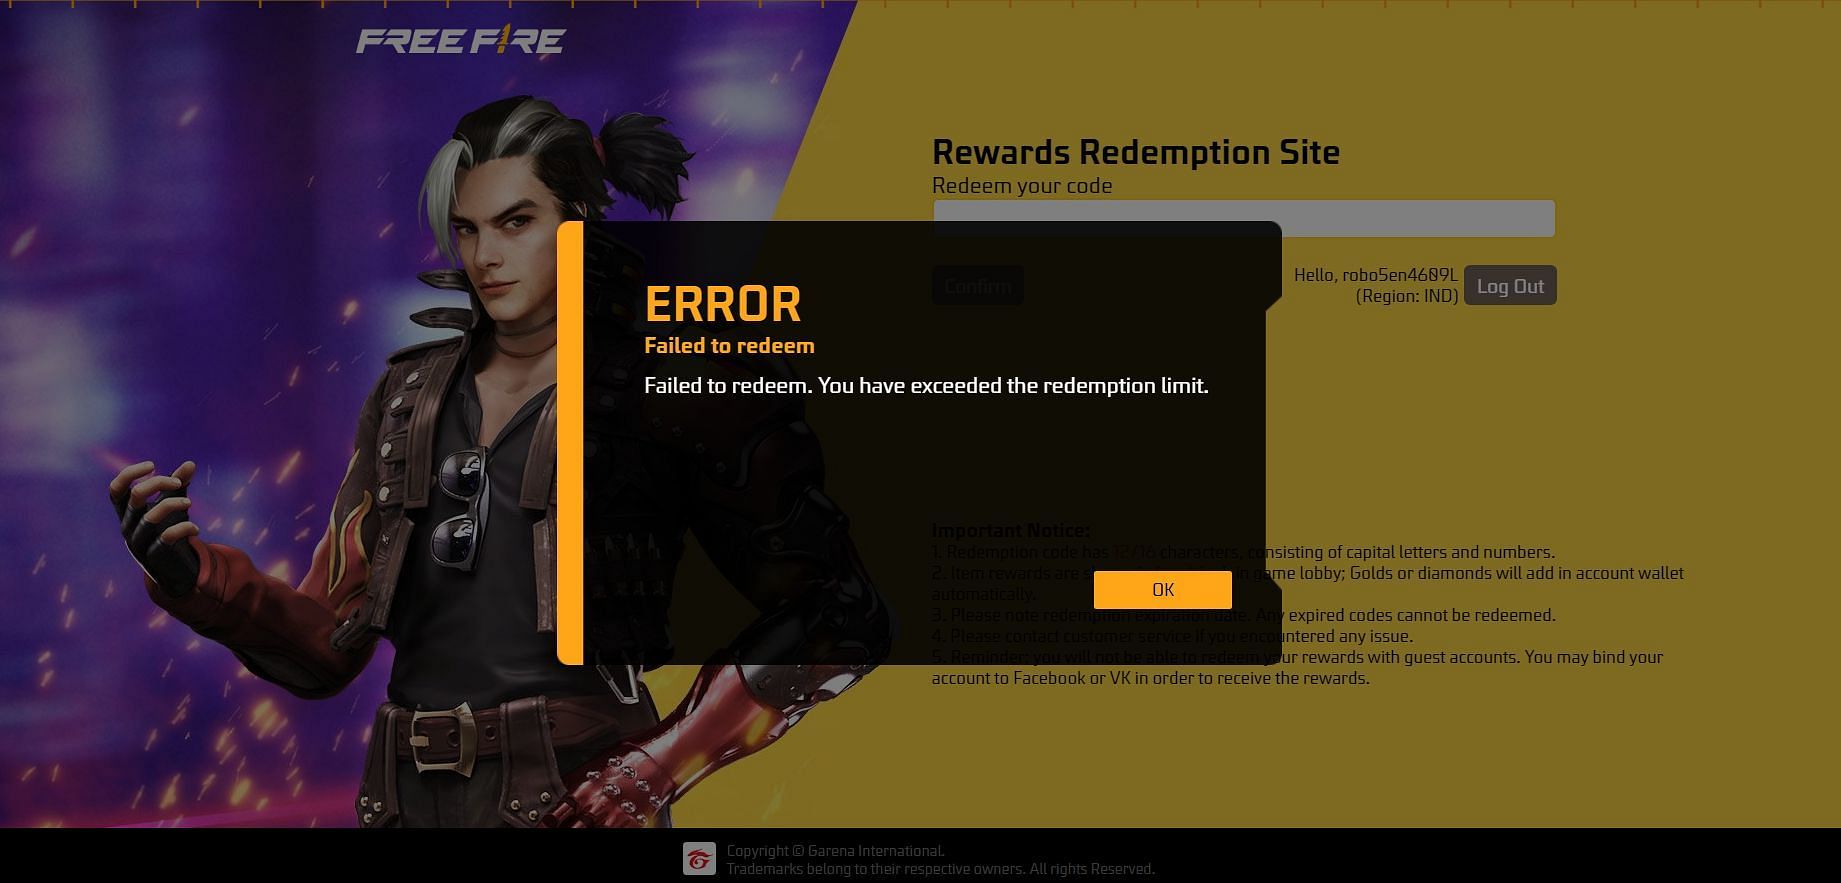 A new error pop-up has annoyed many players (Image via Garena)